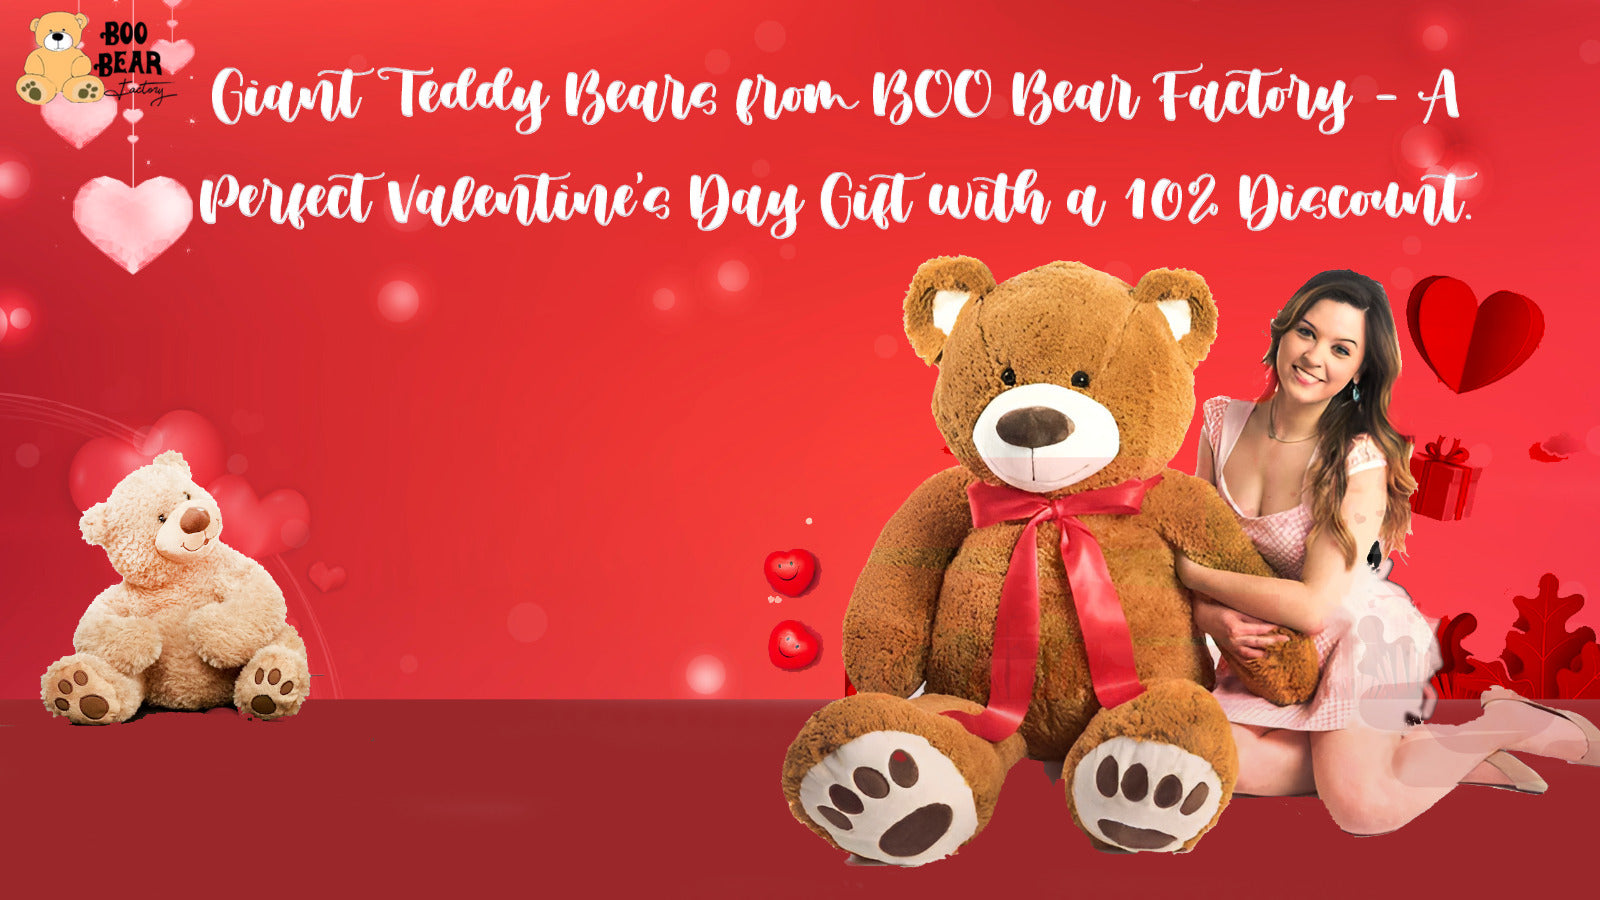 Embracing Love: Giant Teddy Bears from BOO Bear Factory - A Perfect Valentine's Day Gift with a 10% Discount